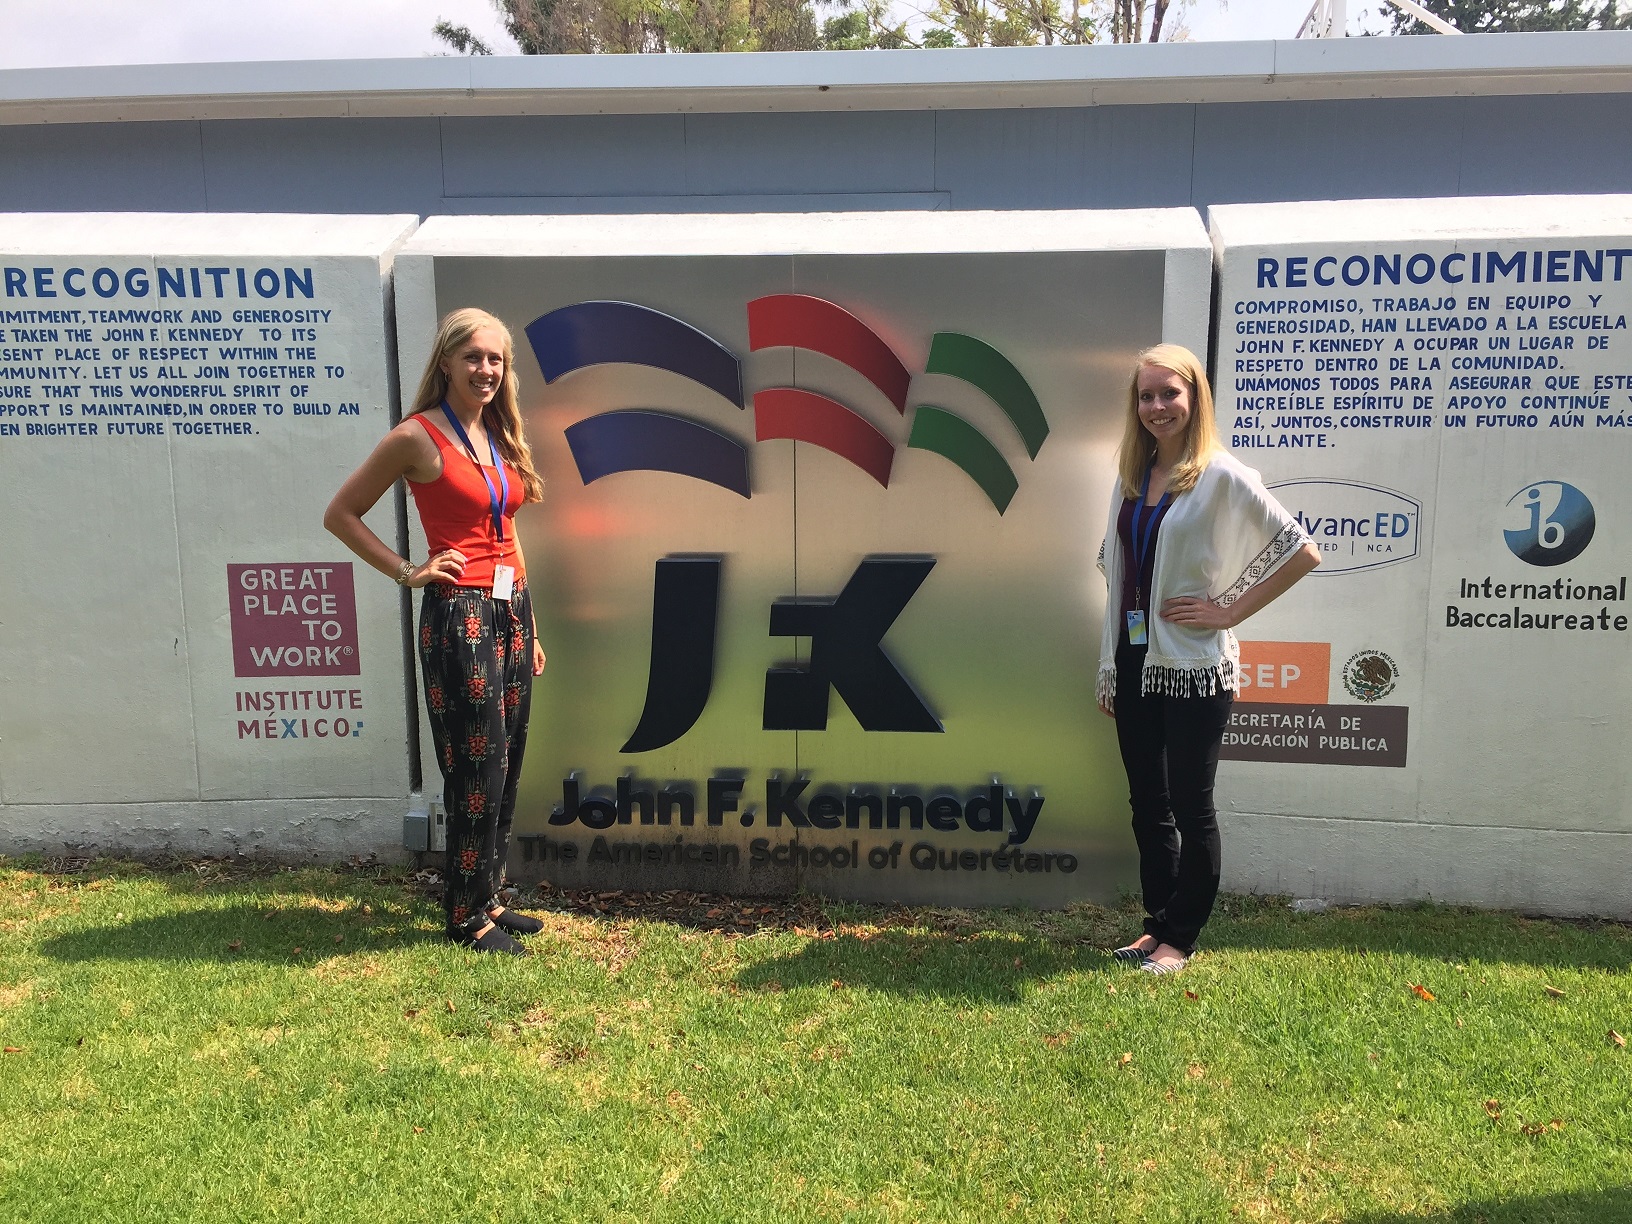 Amber and Katie standing by a JFK sign